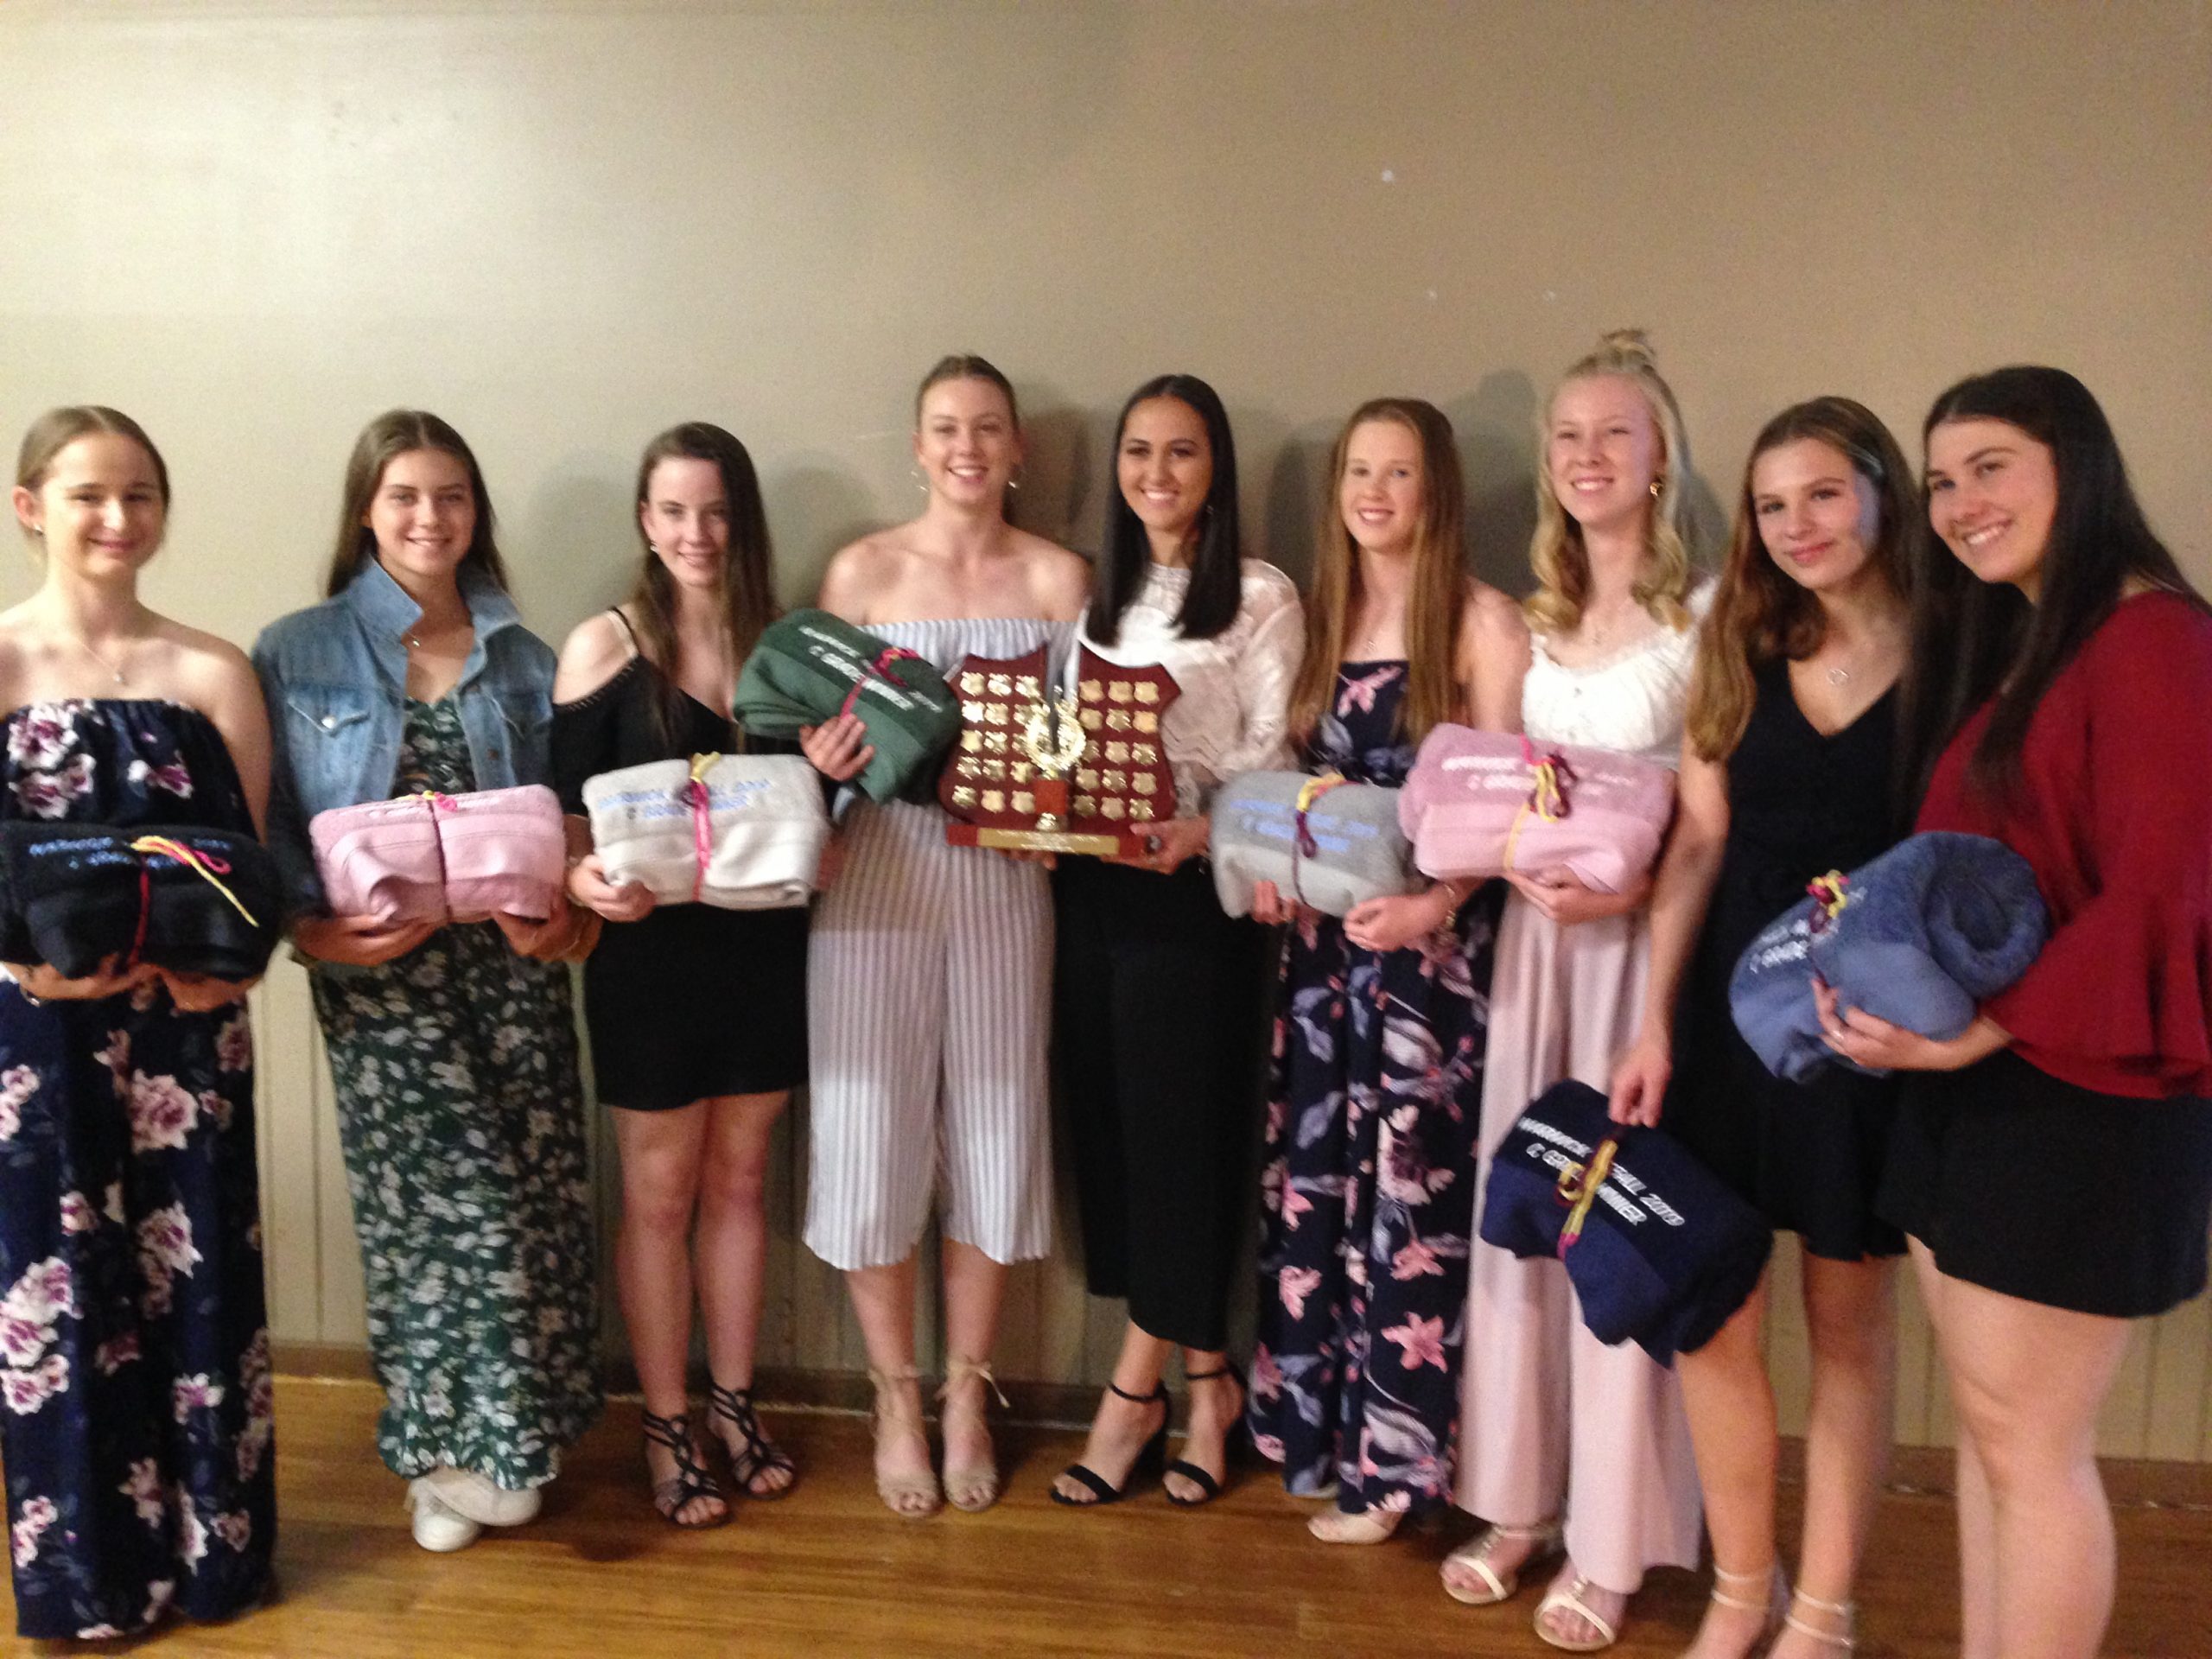 Netball’s night of awards featured image